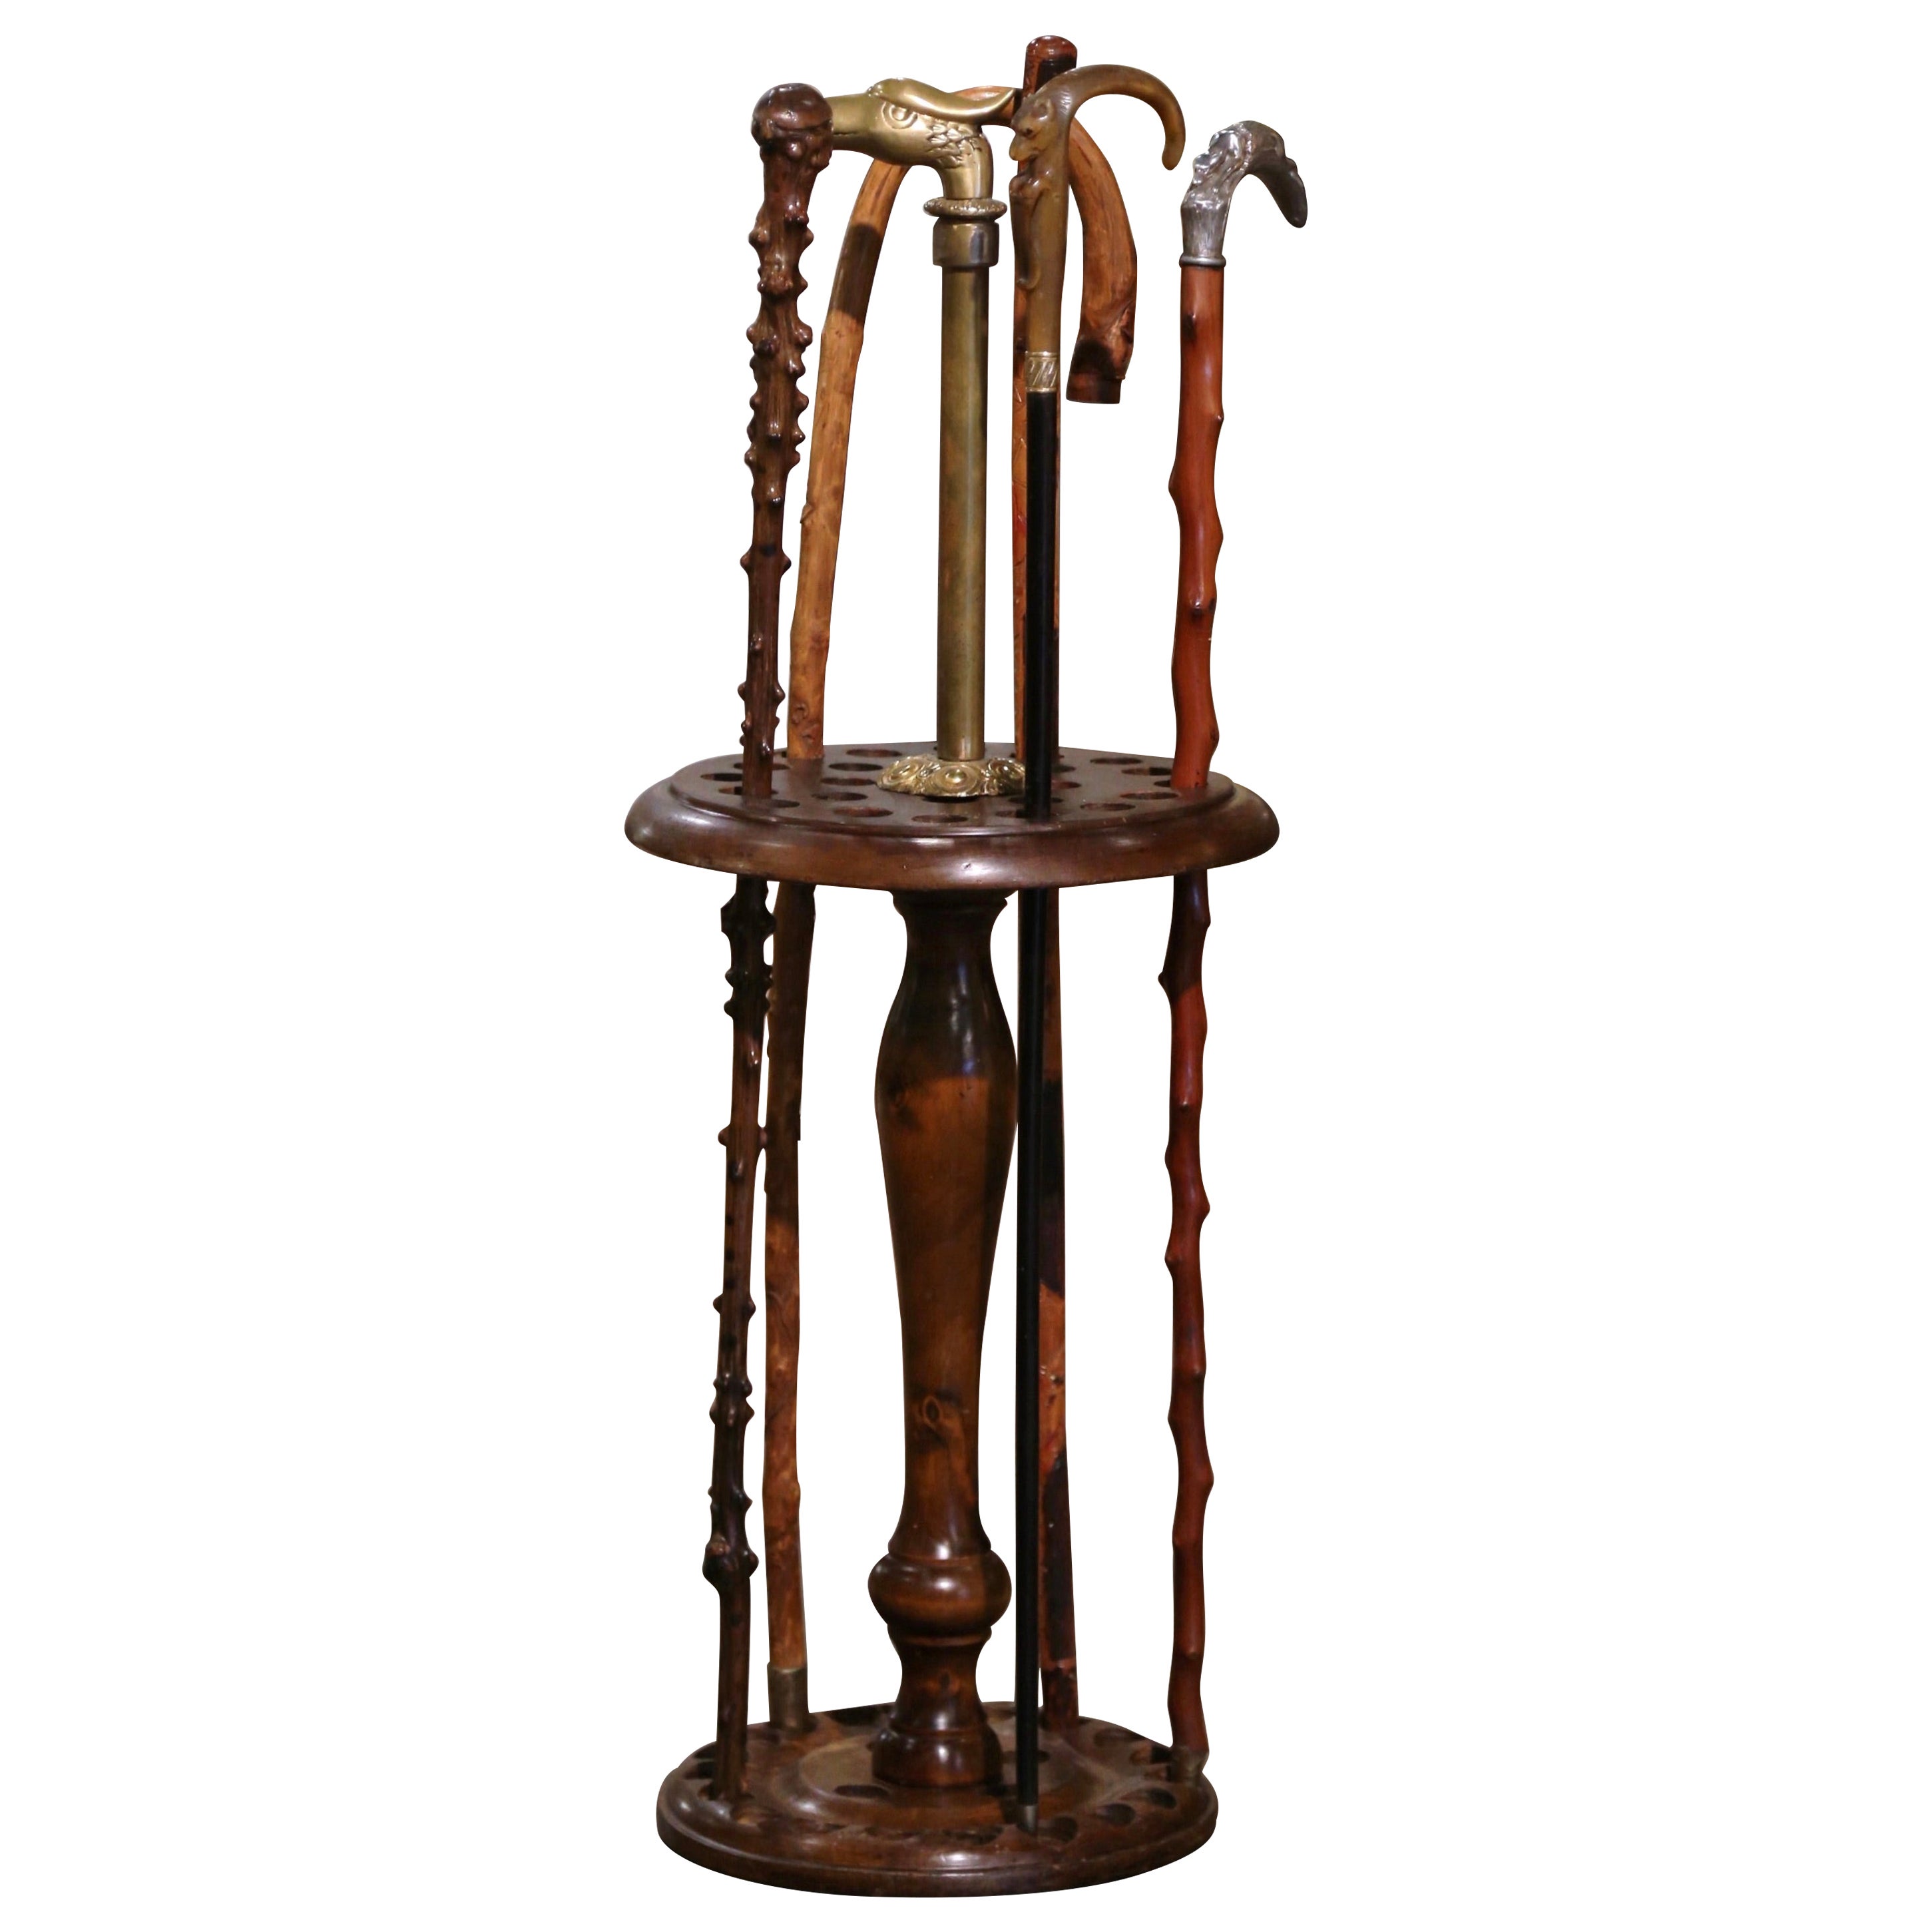 Early 20th Century French 24-Cane Holder with Brass Eagle Handle and 5 Canes For Sale